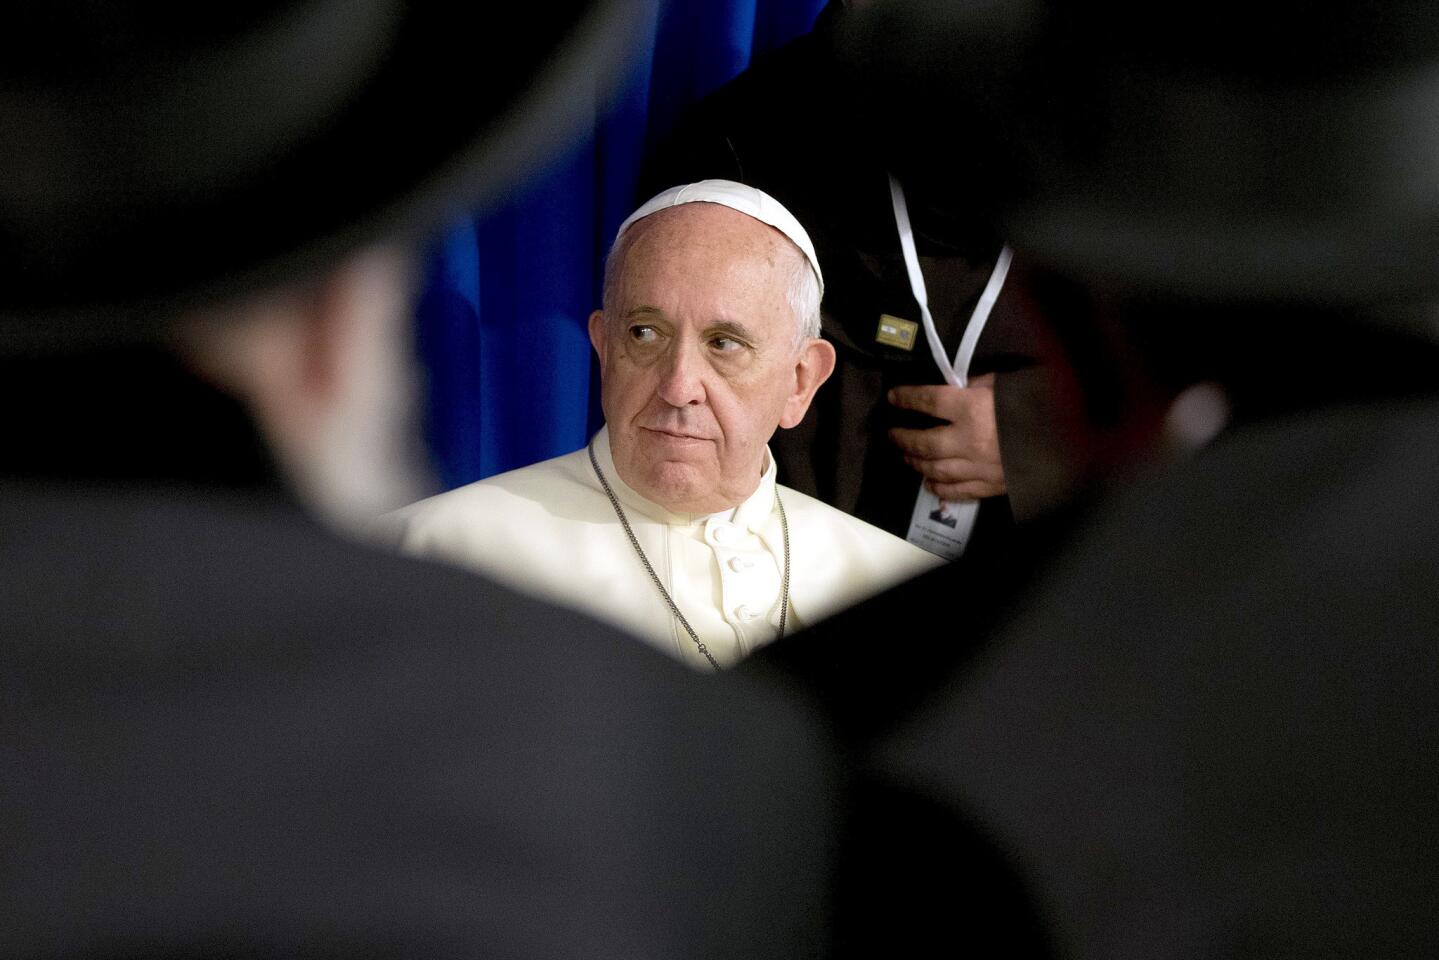 Pope Francis listens to a speech during a visit to the Heichal Shlomo Center in Jerusalem. The pope is facing a diplomatic high-wire act as he visits sacred Muslim and Jewish sites in Jerusalem on the final day of his Middle East tour.